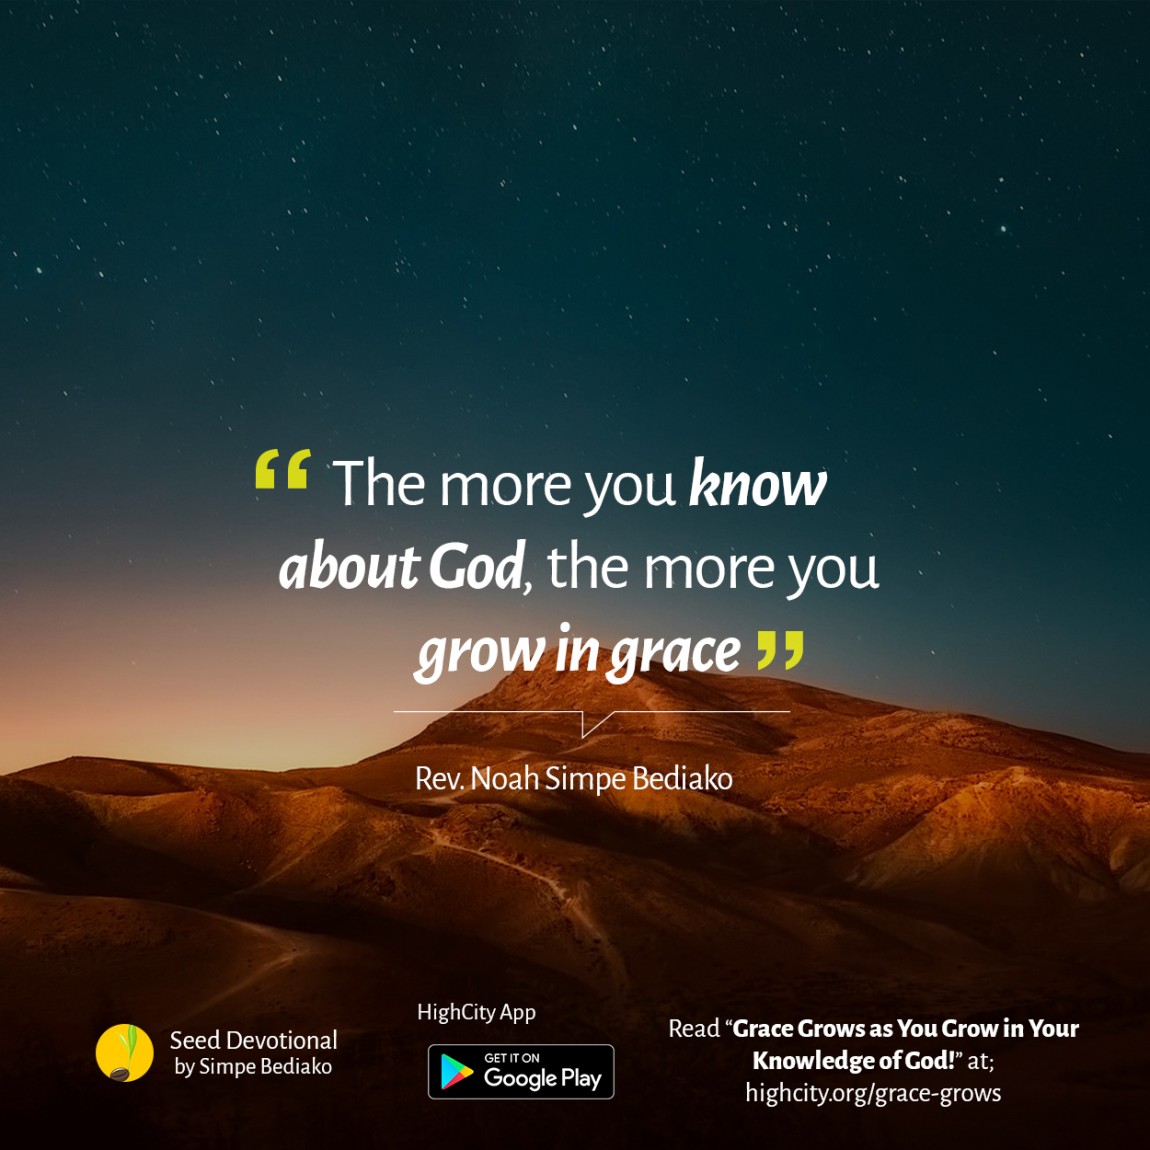 Grace Grows as You Grow in Your Knowledge of God